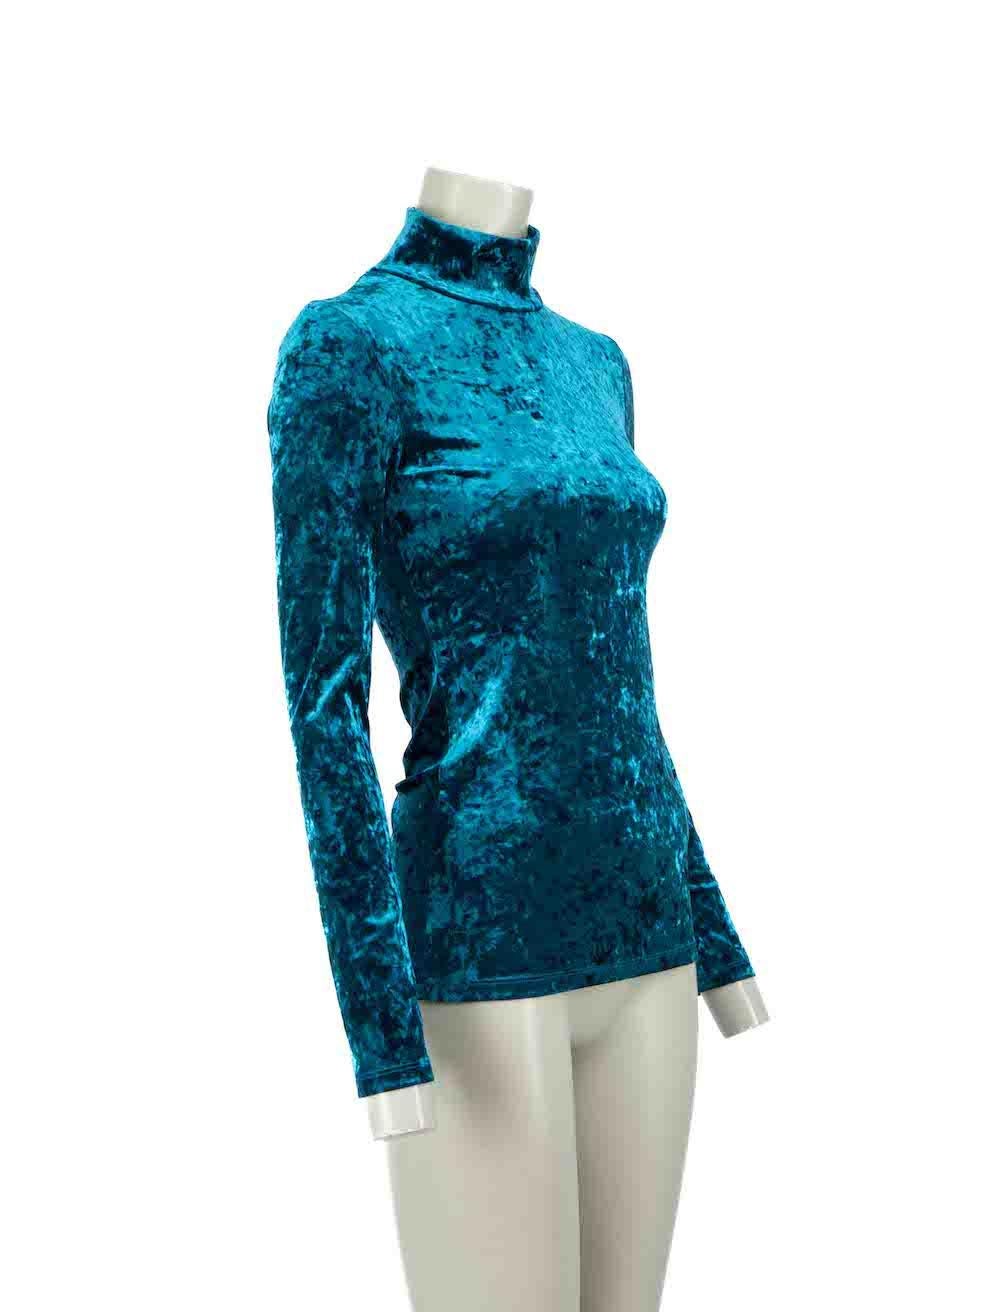 CONDITION is Very good. Hardly any visible wear to top is evident on this used Maje designer resale item.
 
Details
Turquoise
Velvet
Long sleeves top
Turtleneck
Stretchy
 
Made in China
 
Composition
59% Polyester, 32% Polyamide and 9% Elastane
